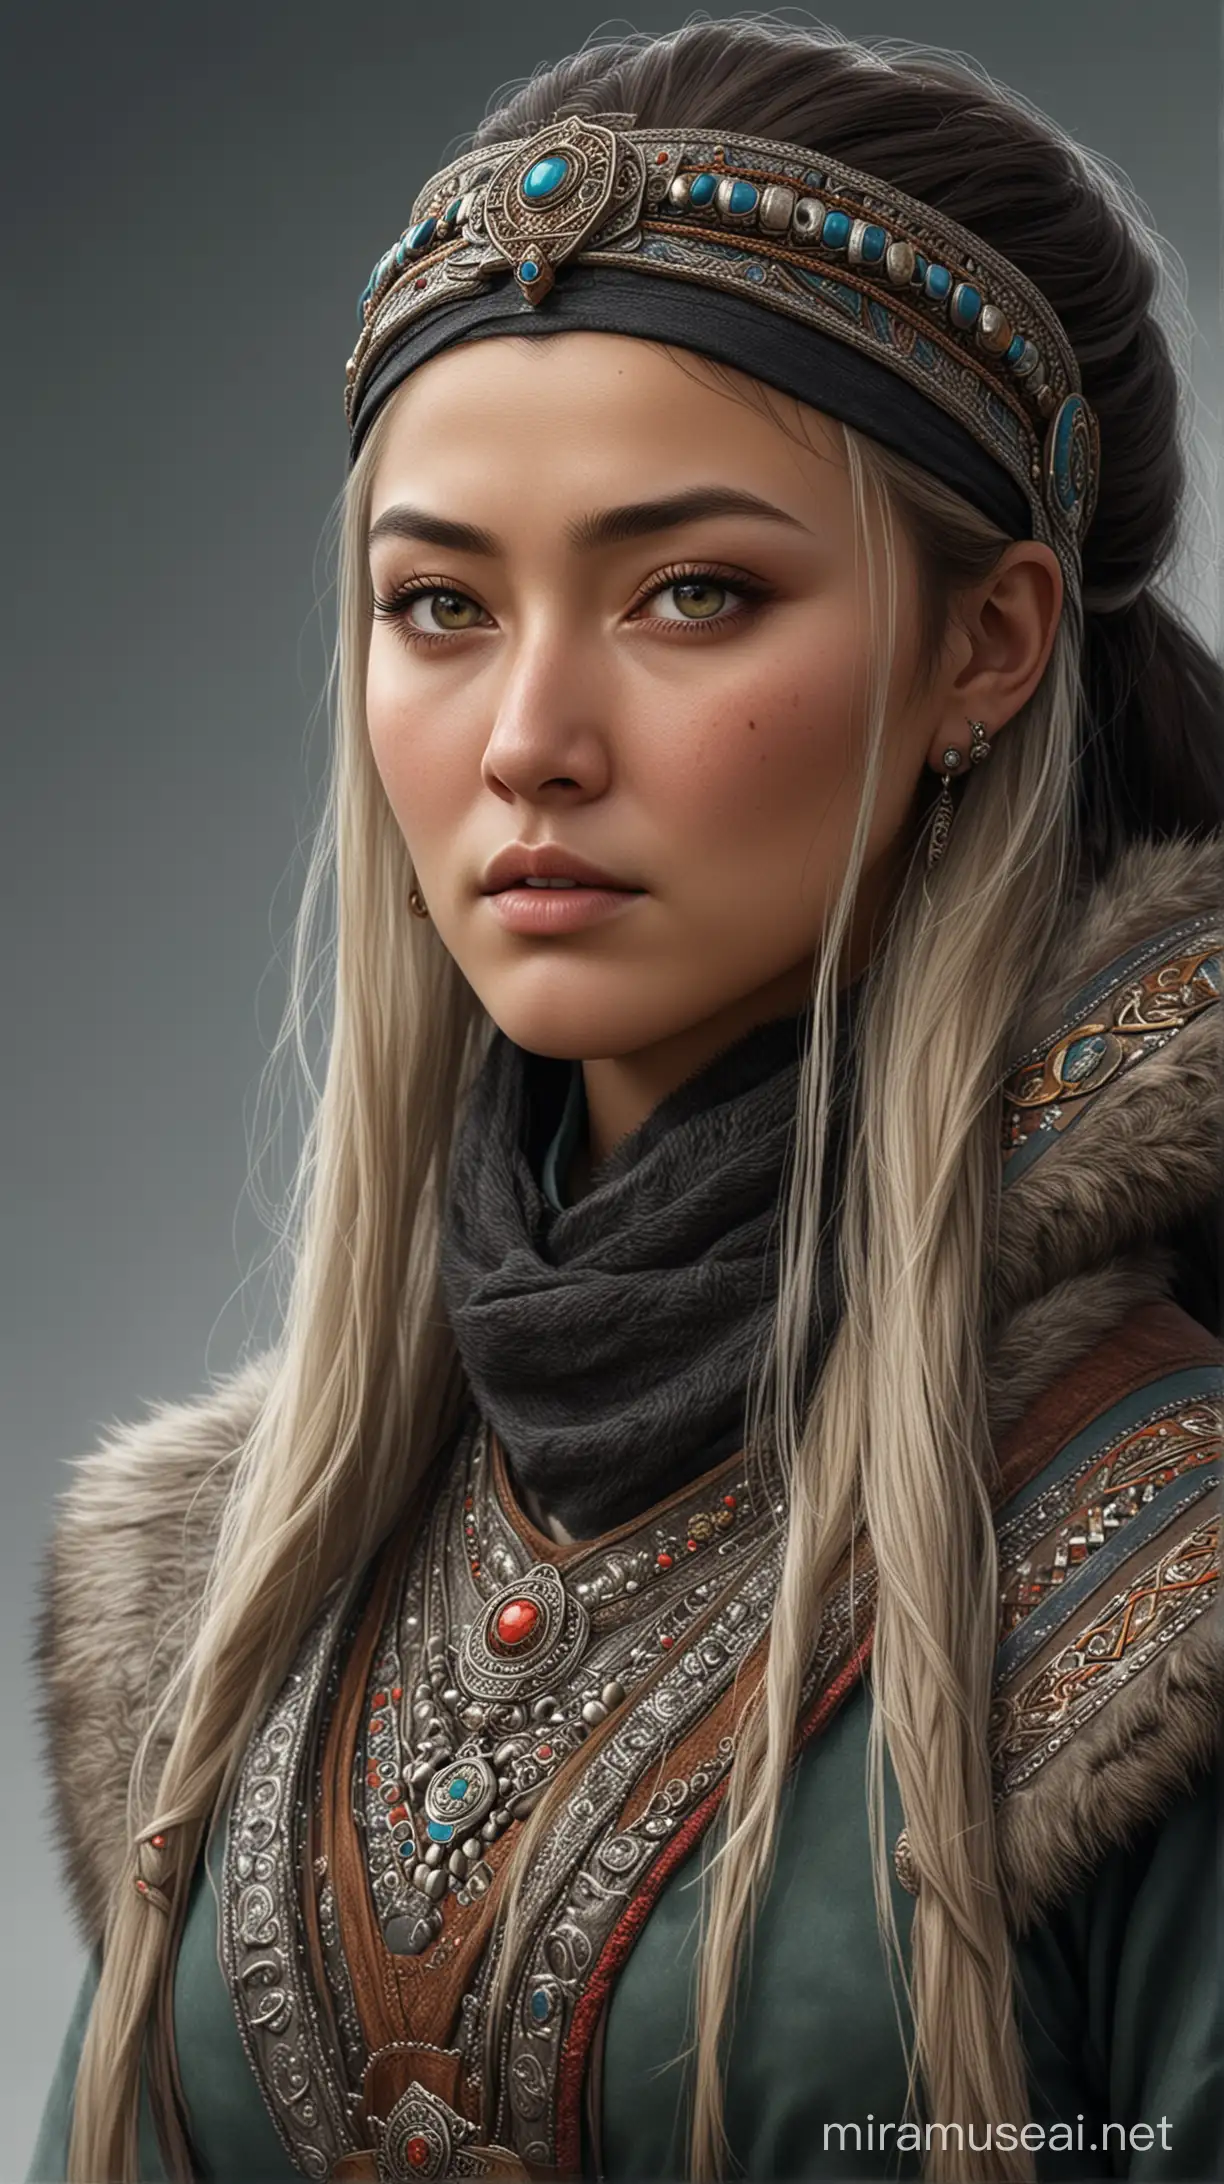 Kutlun, the granddaughter of Genghis Khan, known for her high-stakes challenges. hyper realistic